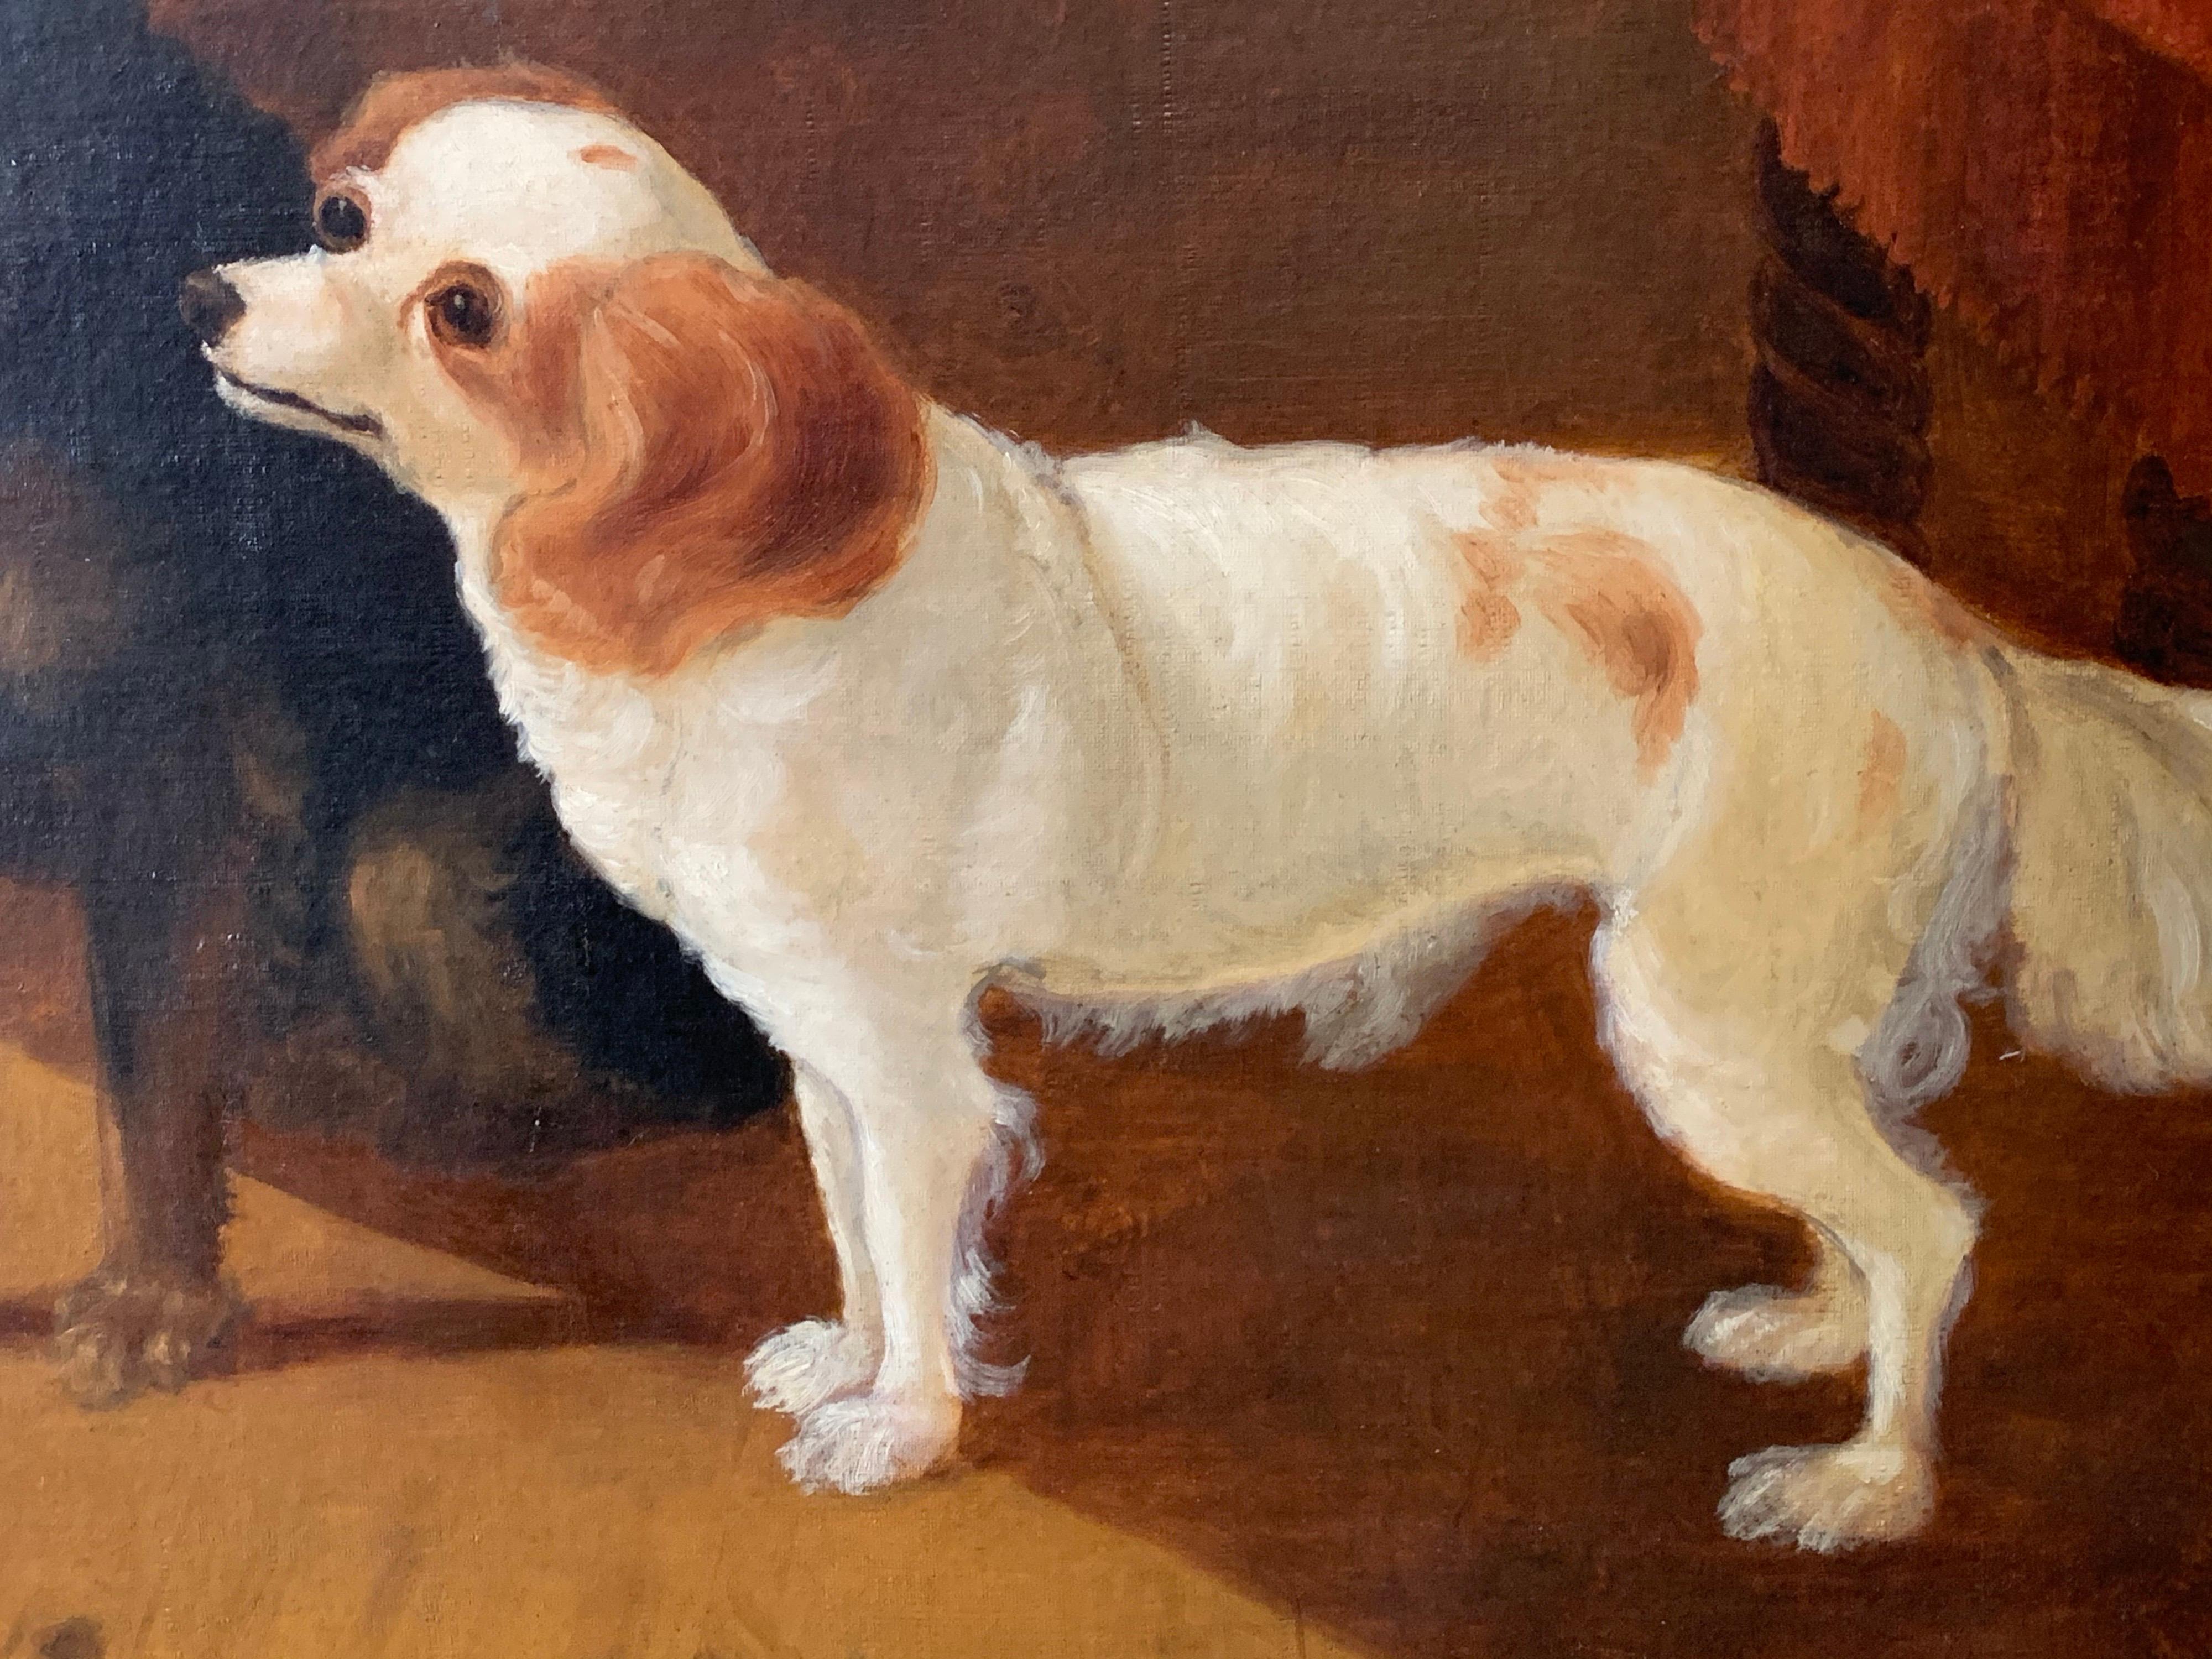 Waiting for the Master Large Victorian Dog Painting Two Dogs in Interior - Brown Animal Painting by Victorian English